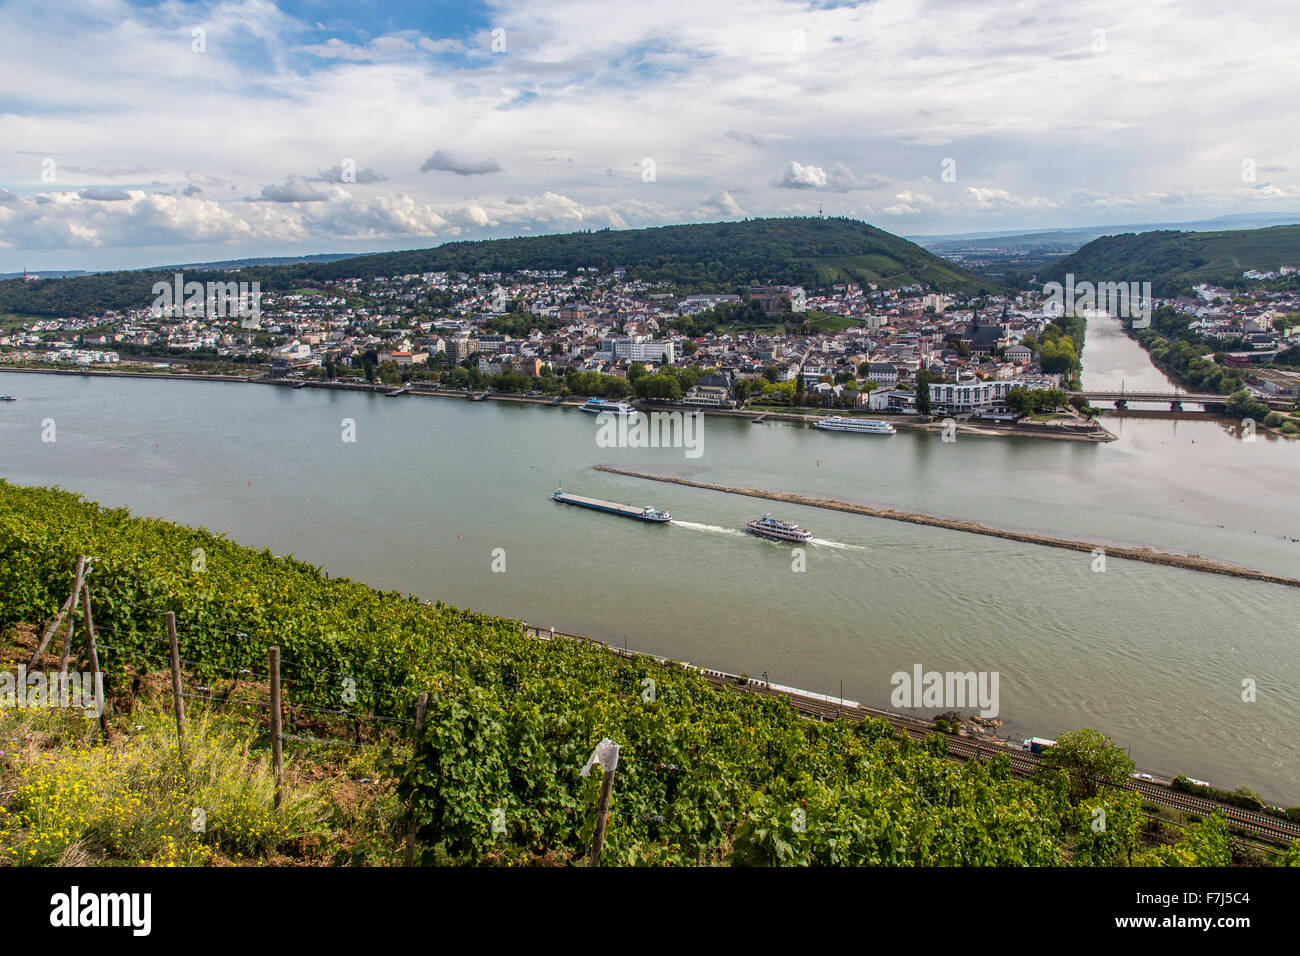 City of Bingen, upper middle Rhine valley, Germany, mouth of river Nahe, Stock Photo